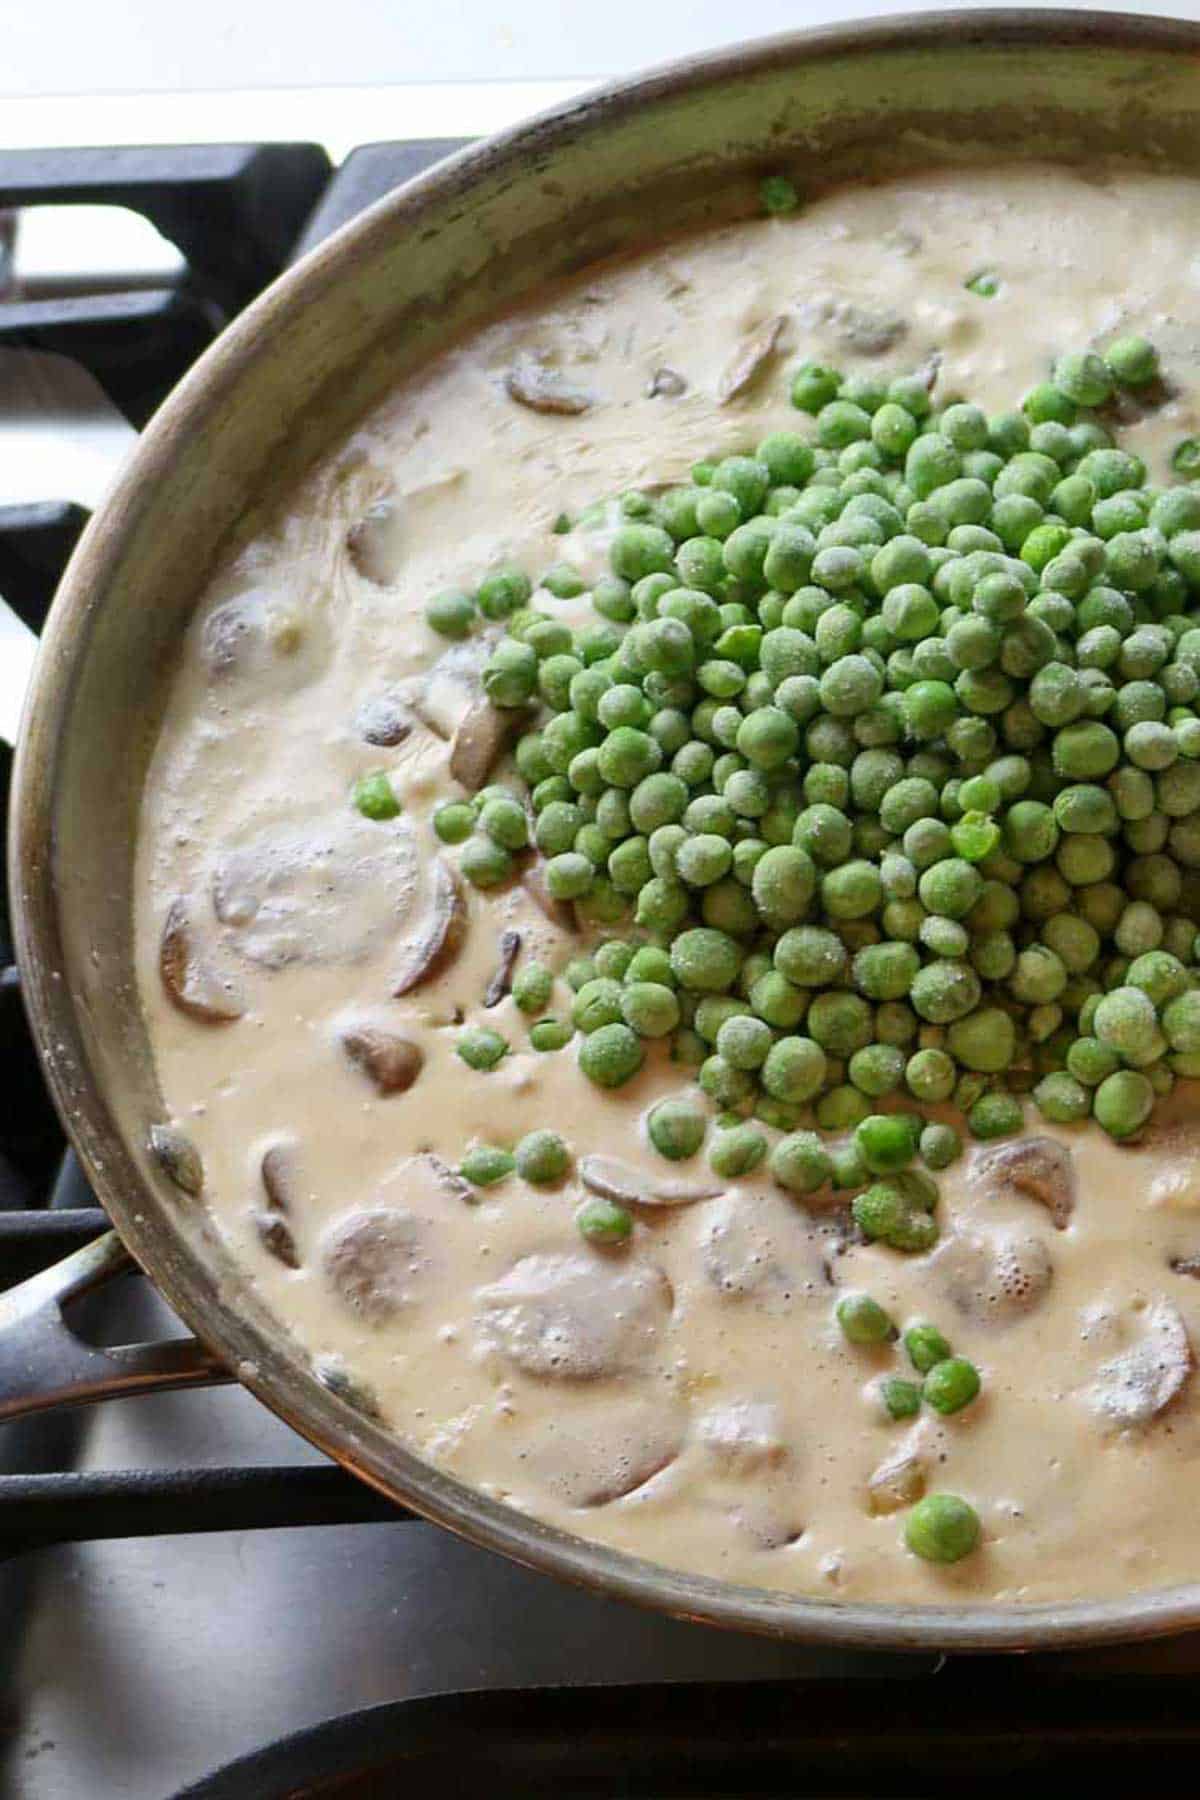 creamy mixture with mushrooms and peas added on top.